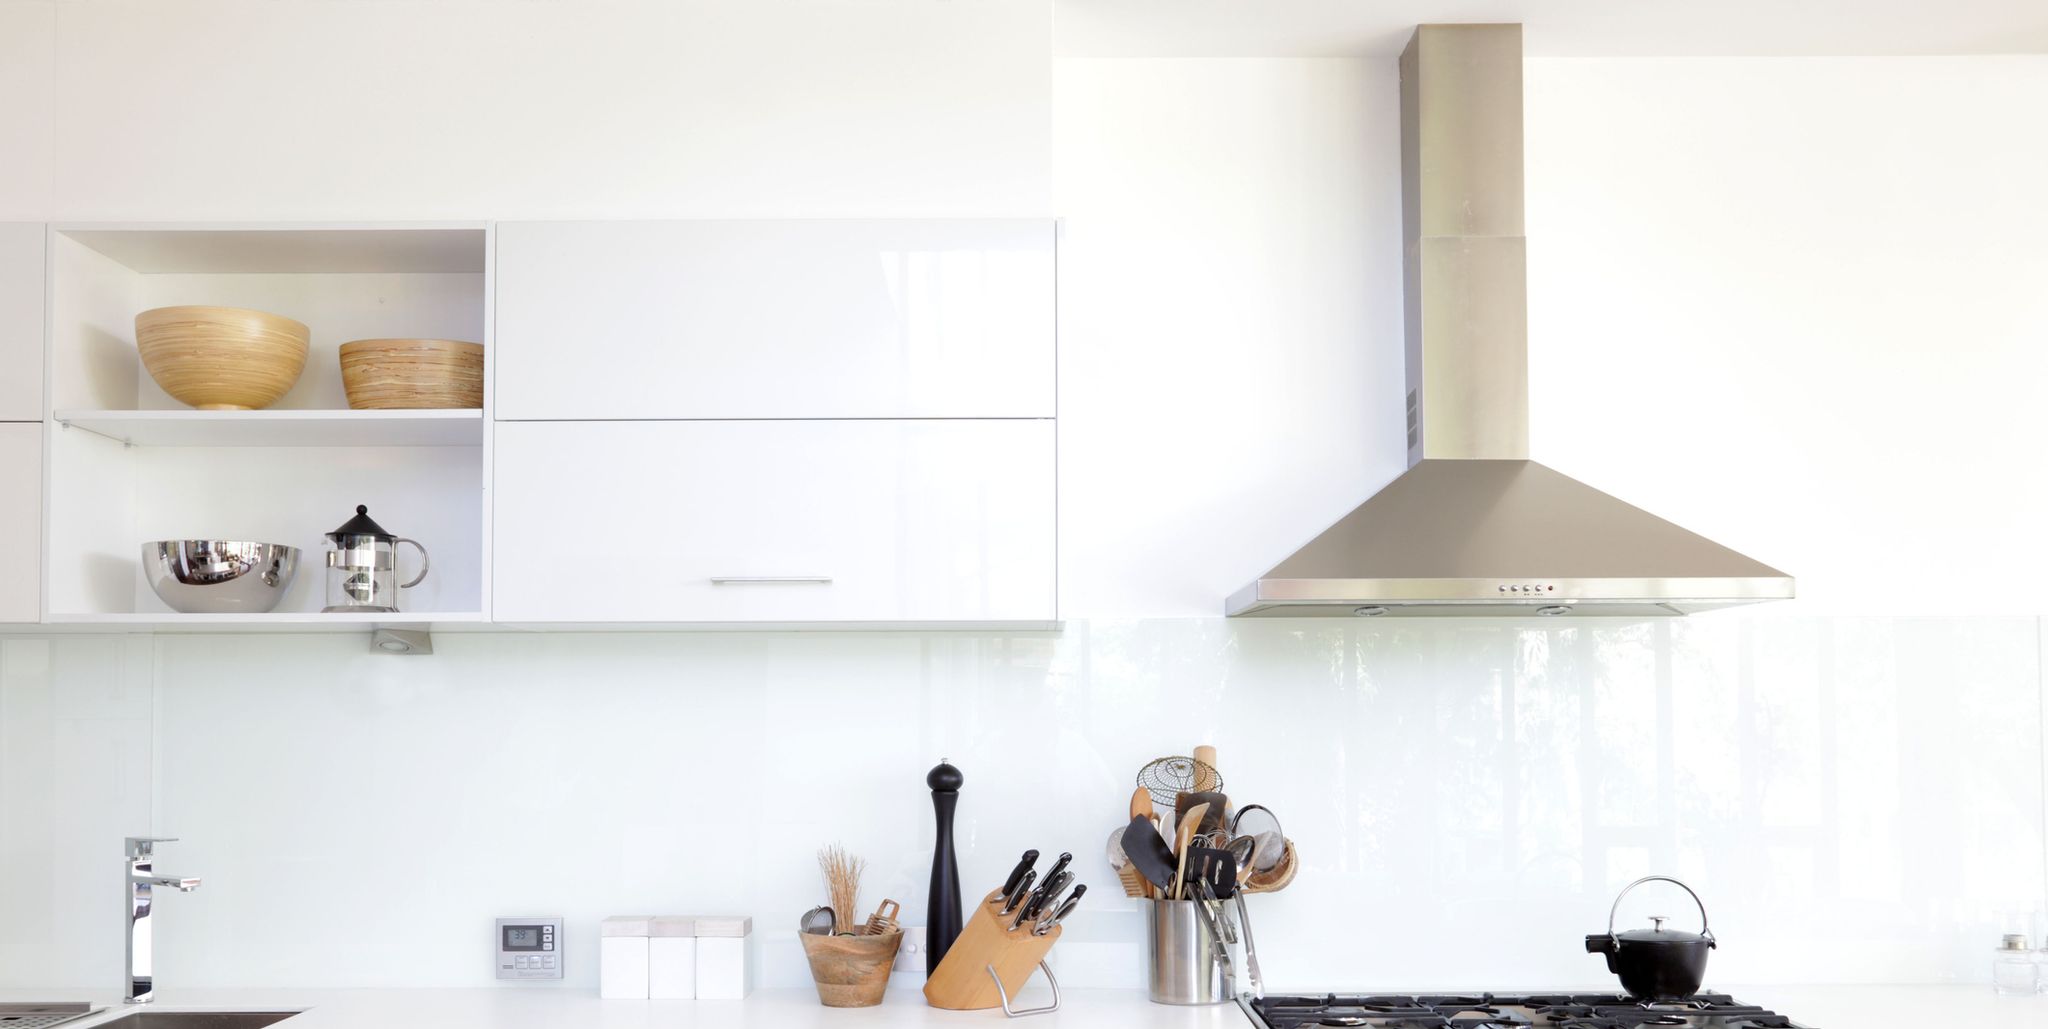 How to Clean Your Range Hood